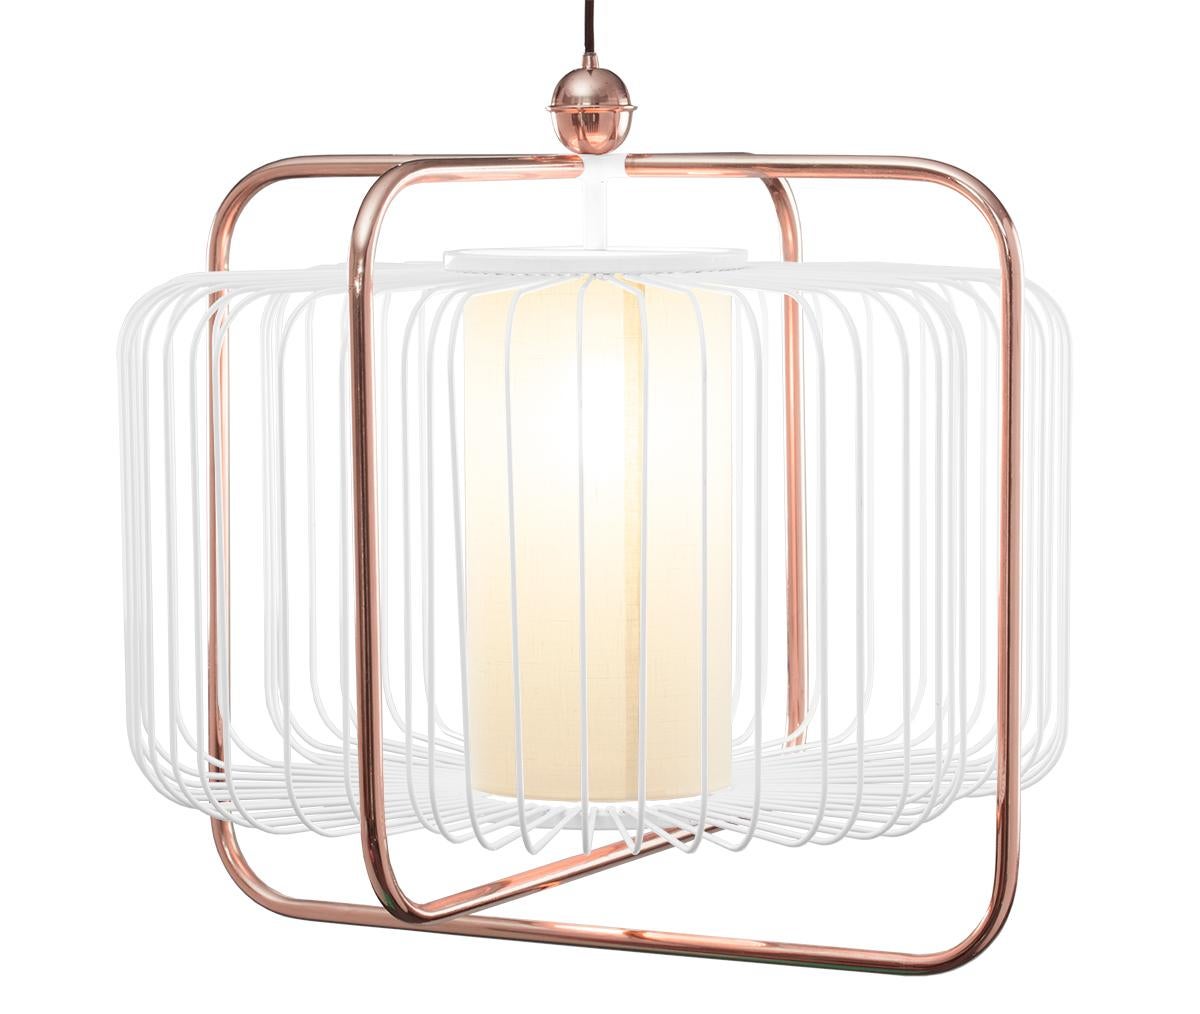 Contemporary Art Deco Inspired Jules I Pendant Lamp in Copper, Taupe and Linen For Sale 10